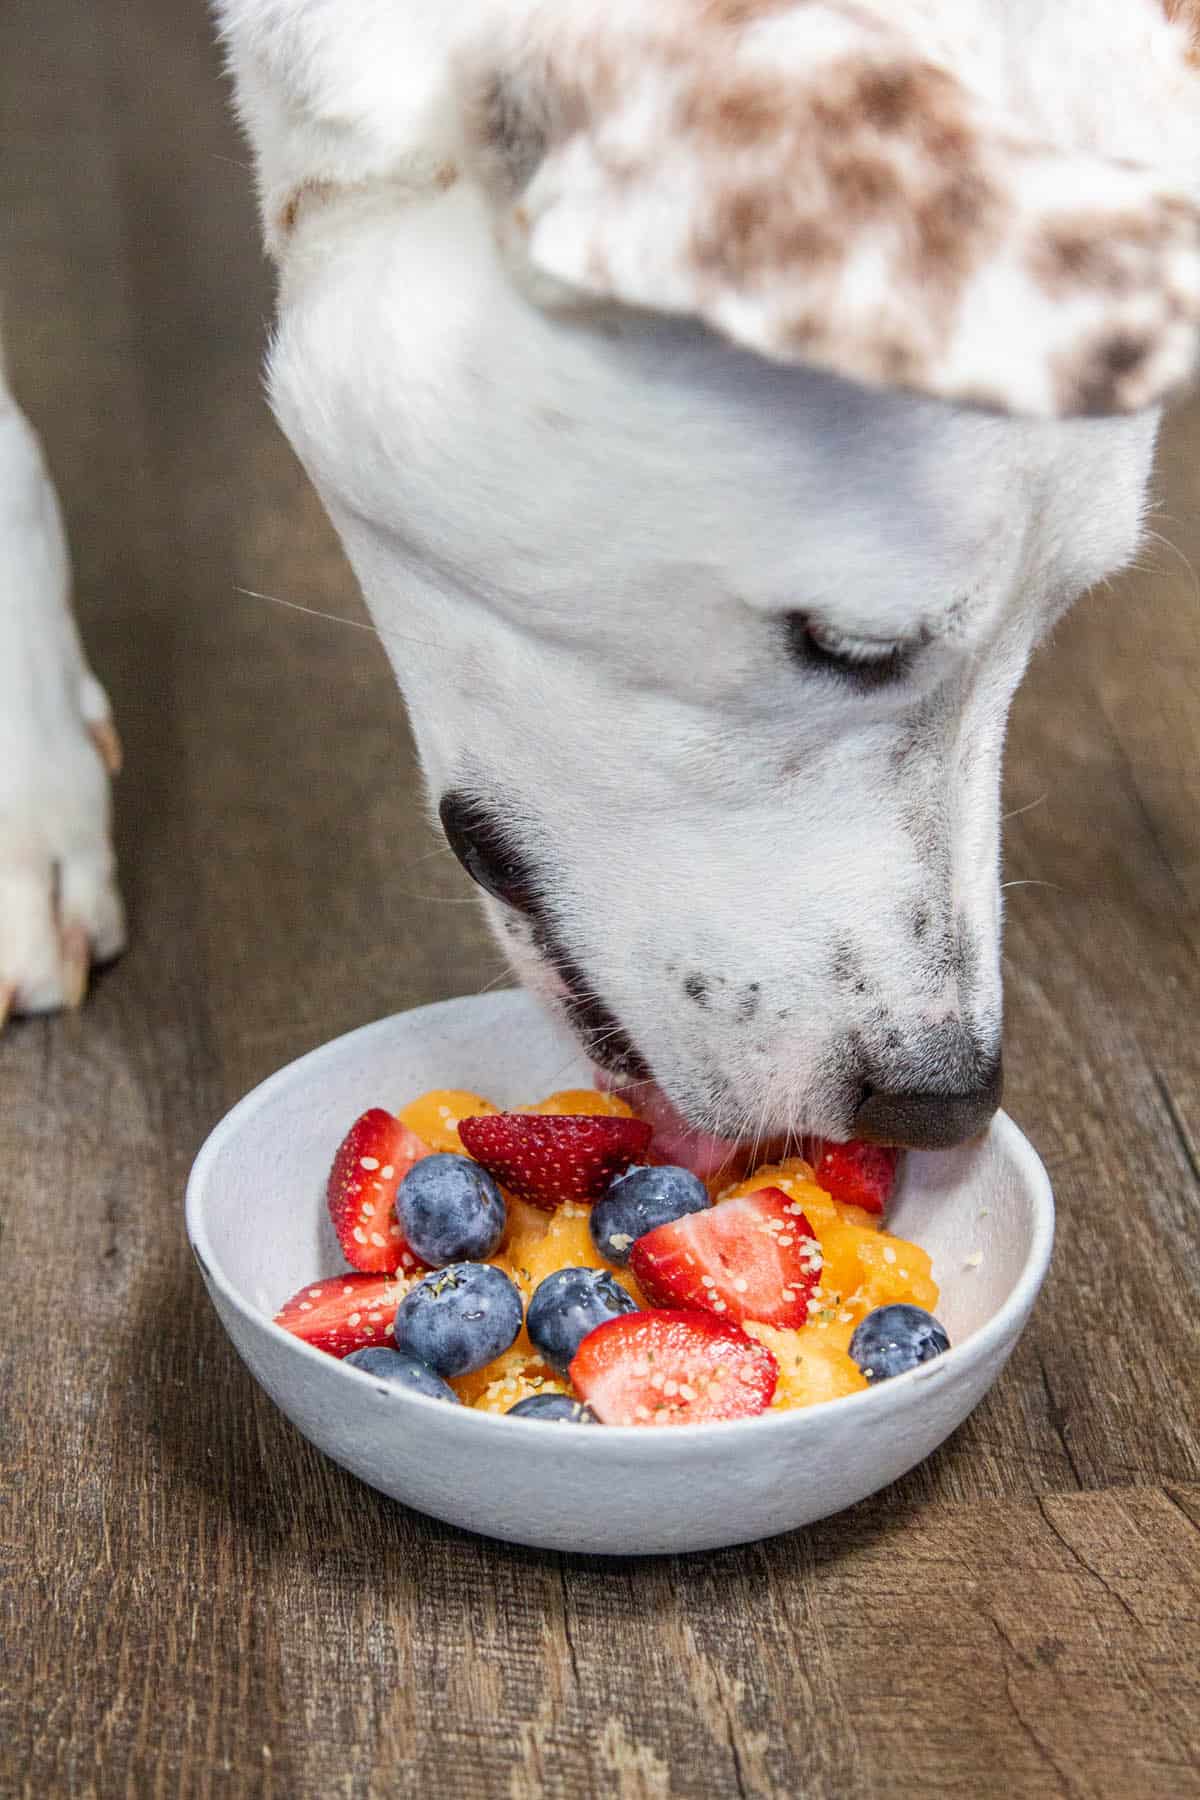 is cantaloupe bad for dogs to eat